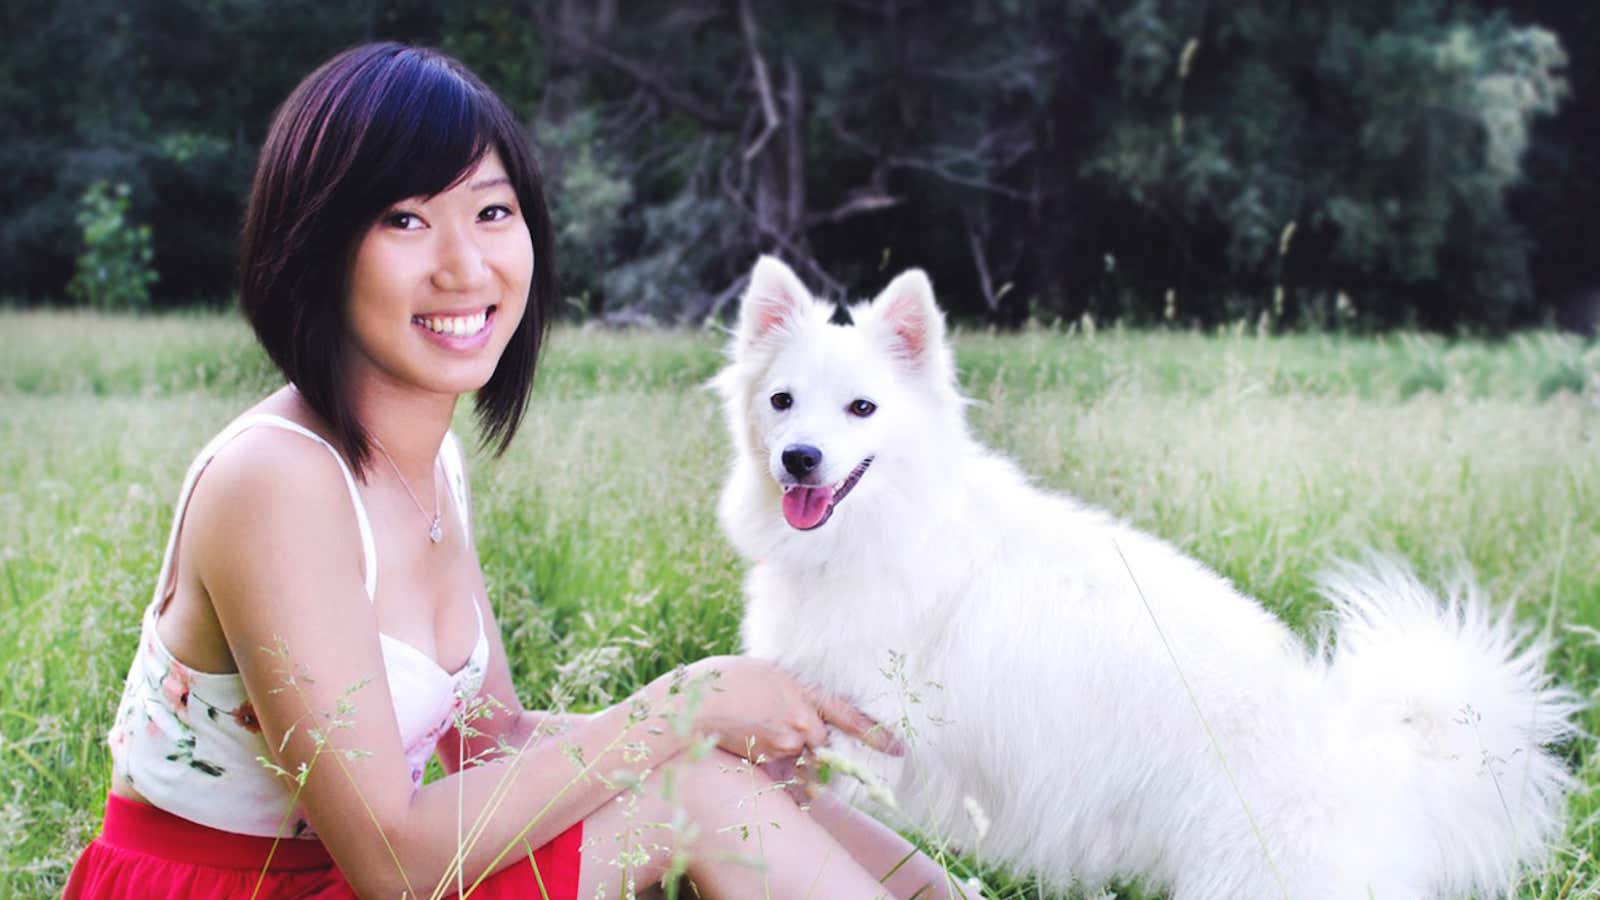 Just a girl, her dog, and 114,000 Instagram followers.